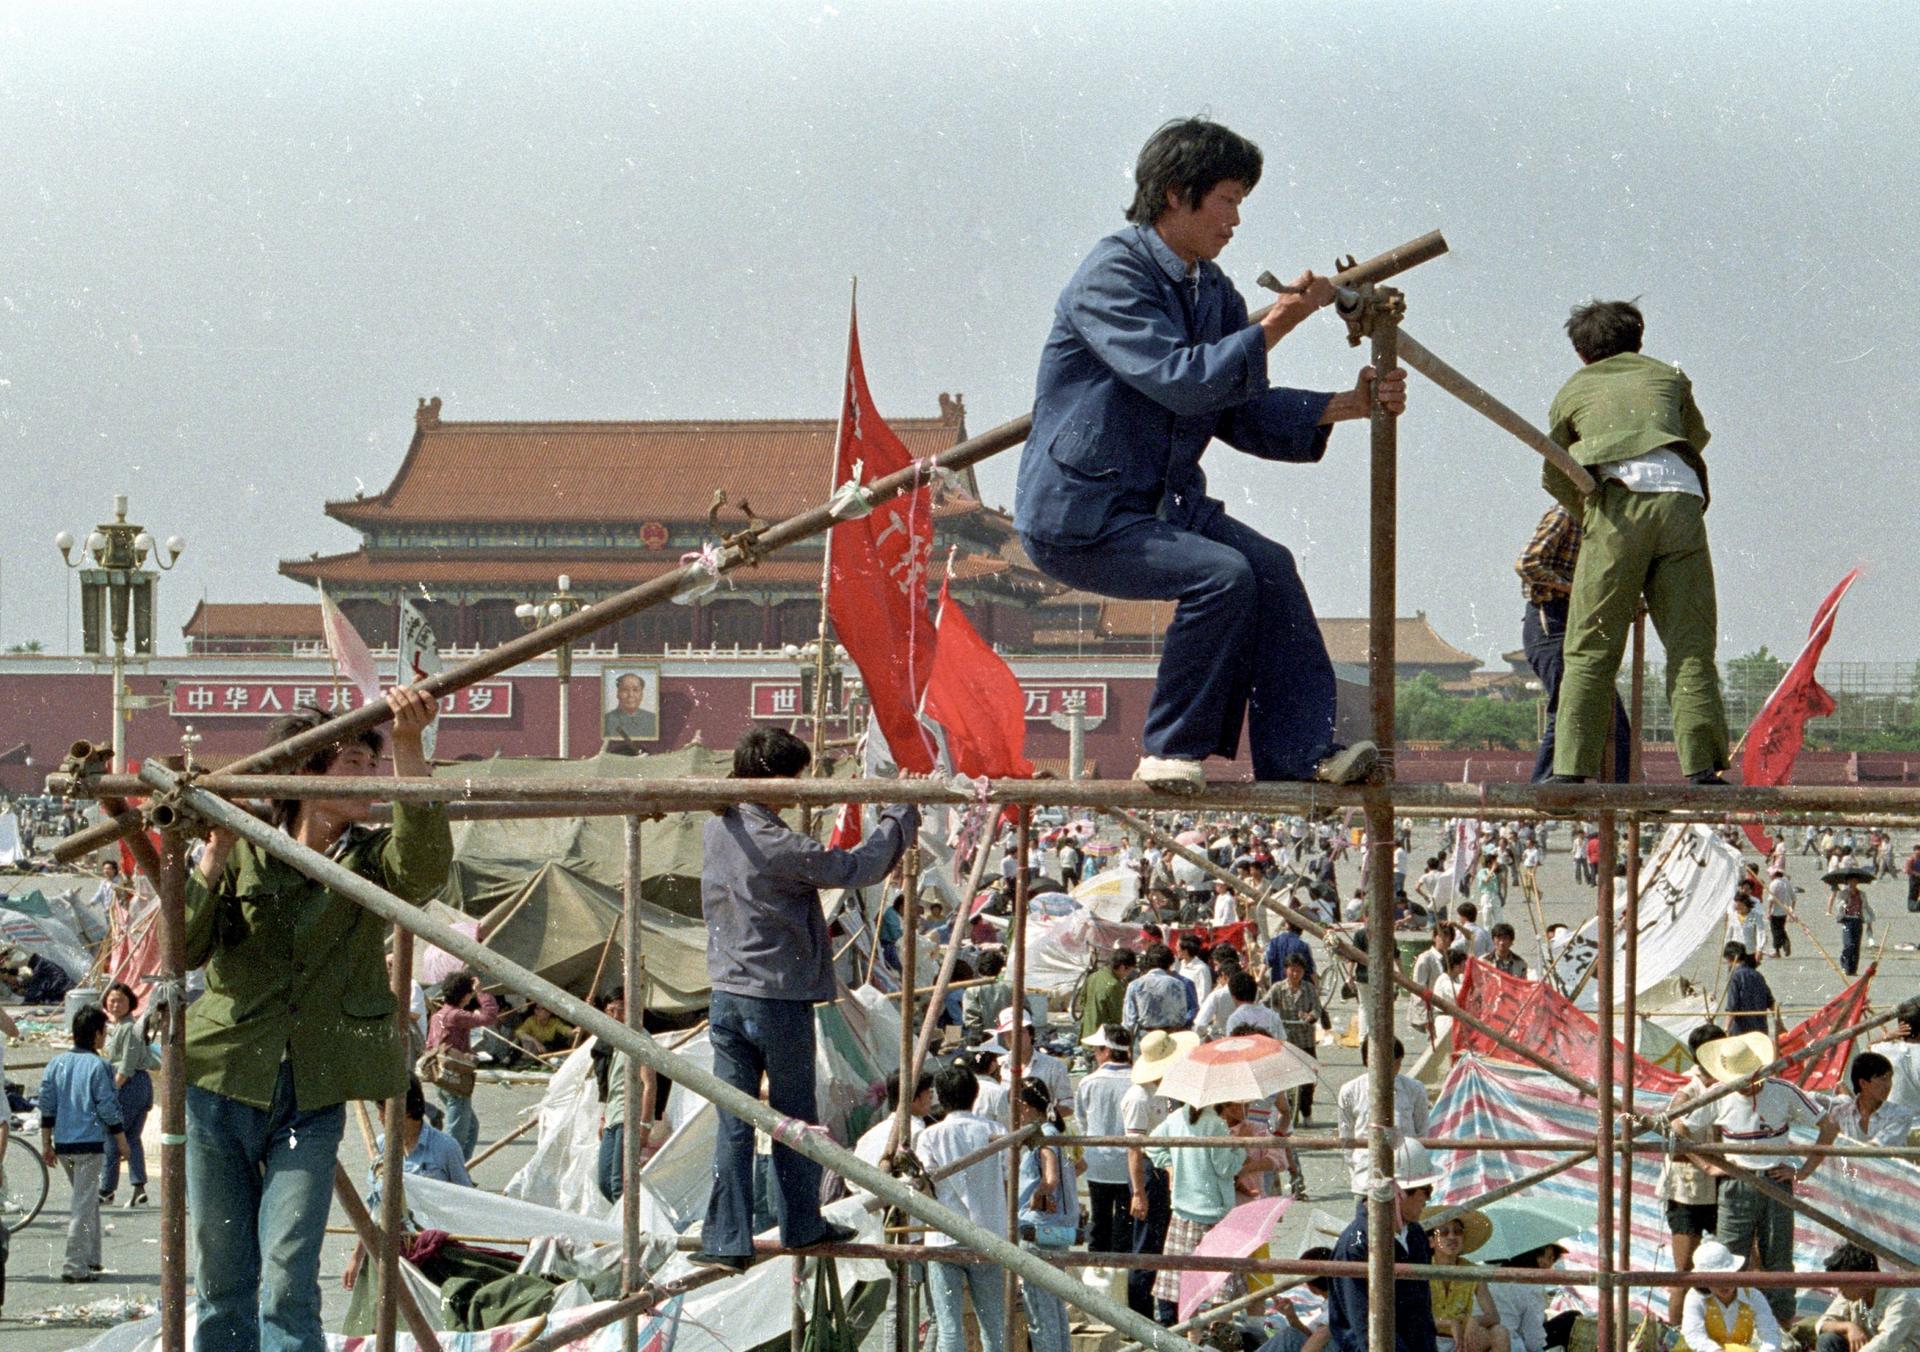 Students prop up wooden poles to build tents in Tiananmen Square.